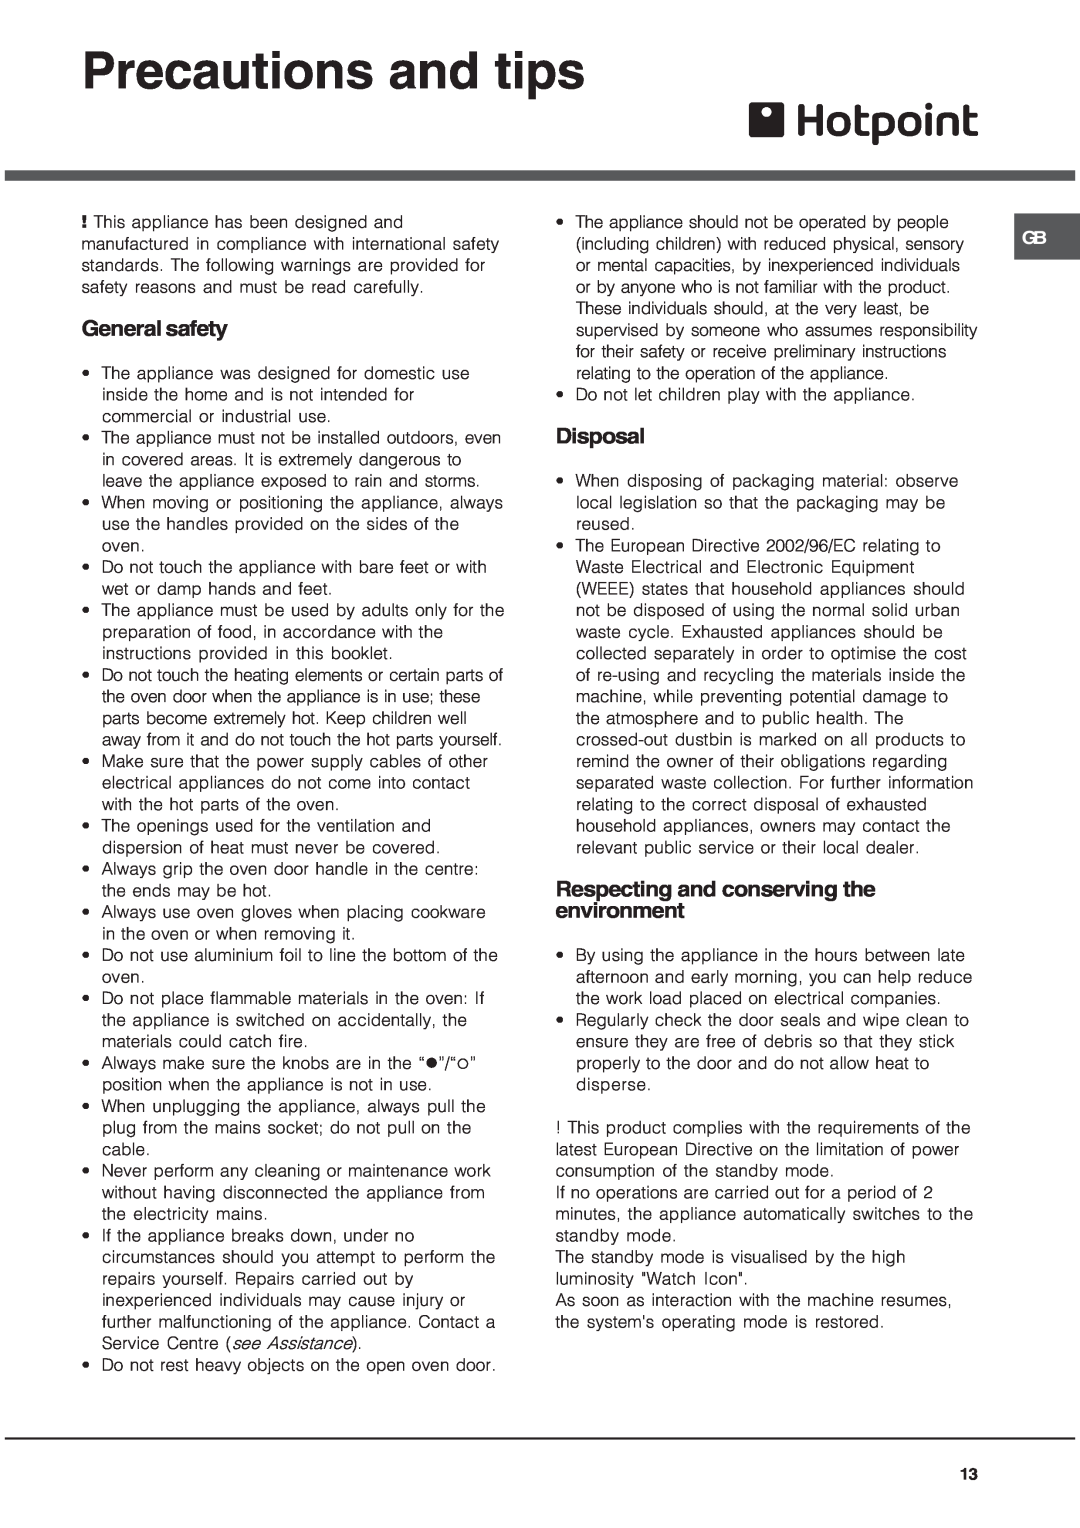 Hotpoint OS 897D IX/HP manual Precautions and tips, General safety, Disposal, Respecting and conserving the environment 